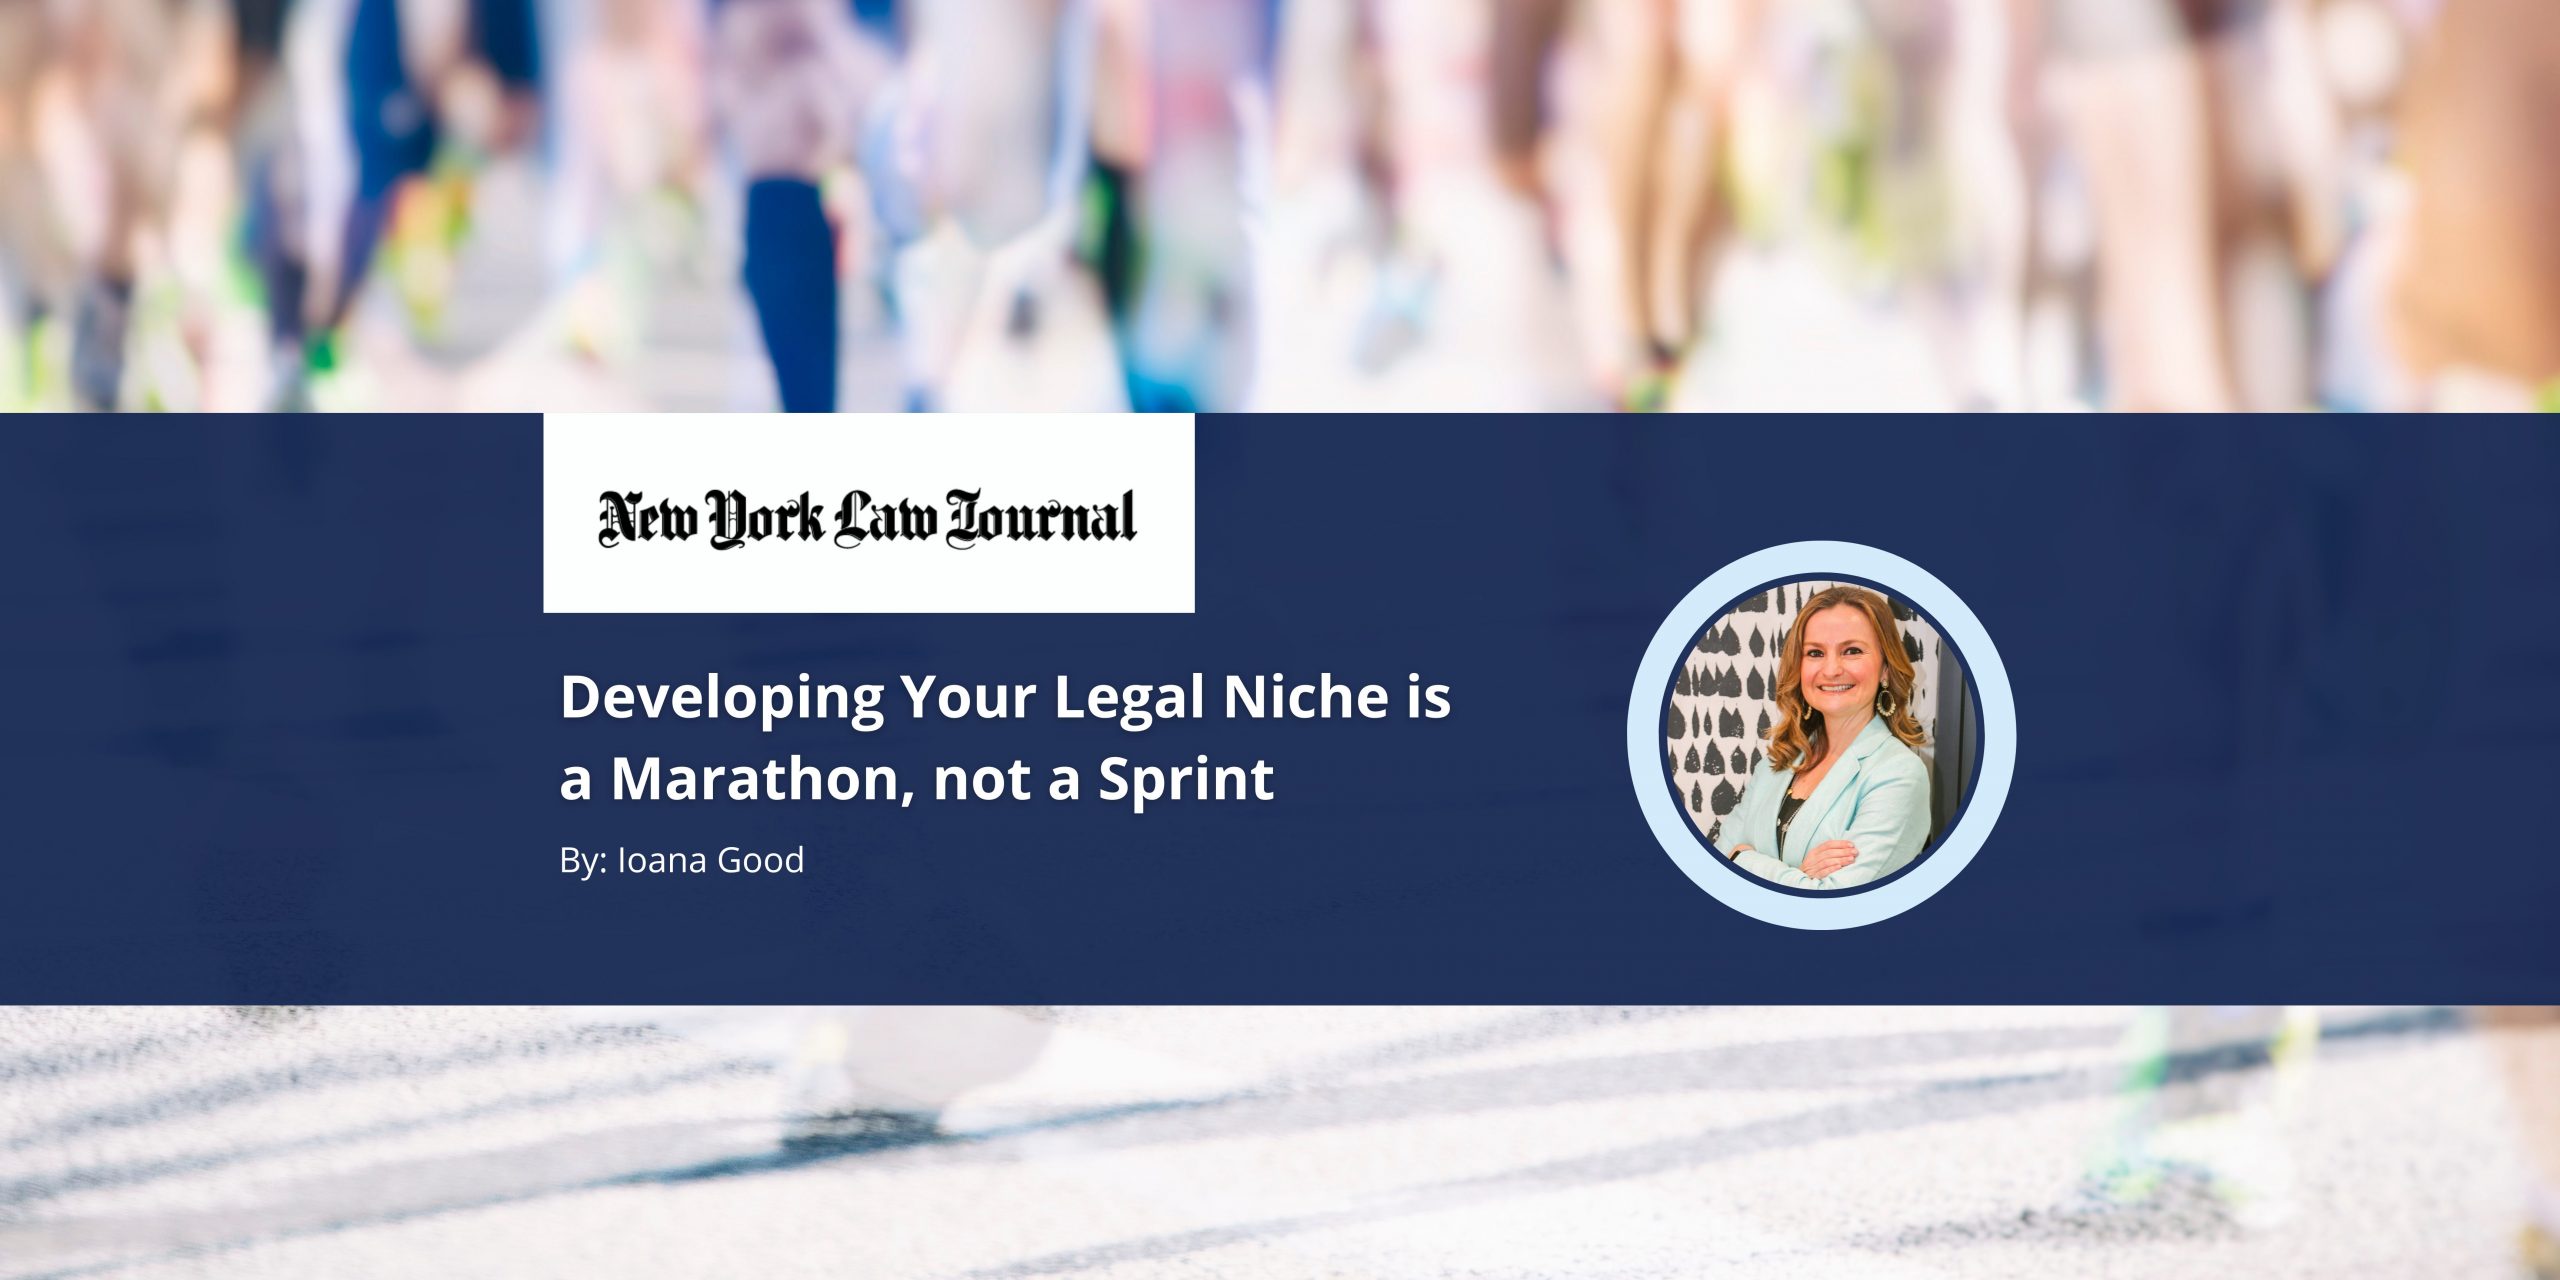 Featured image for “Developing Your Legal Niche is a Marathon, not a Sprint”